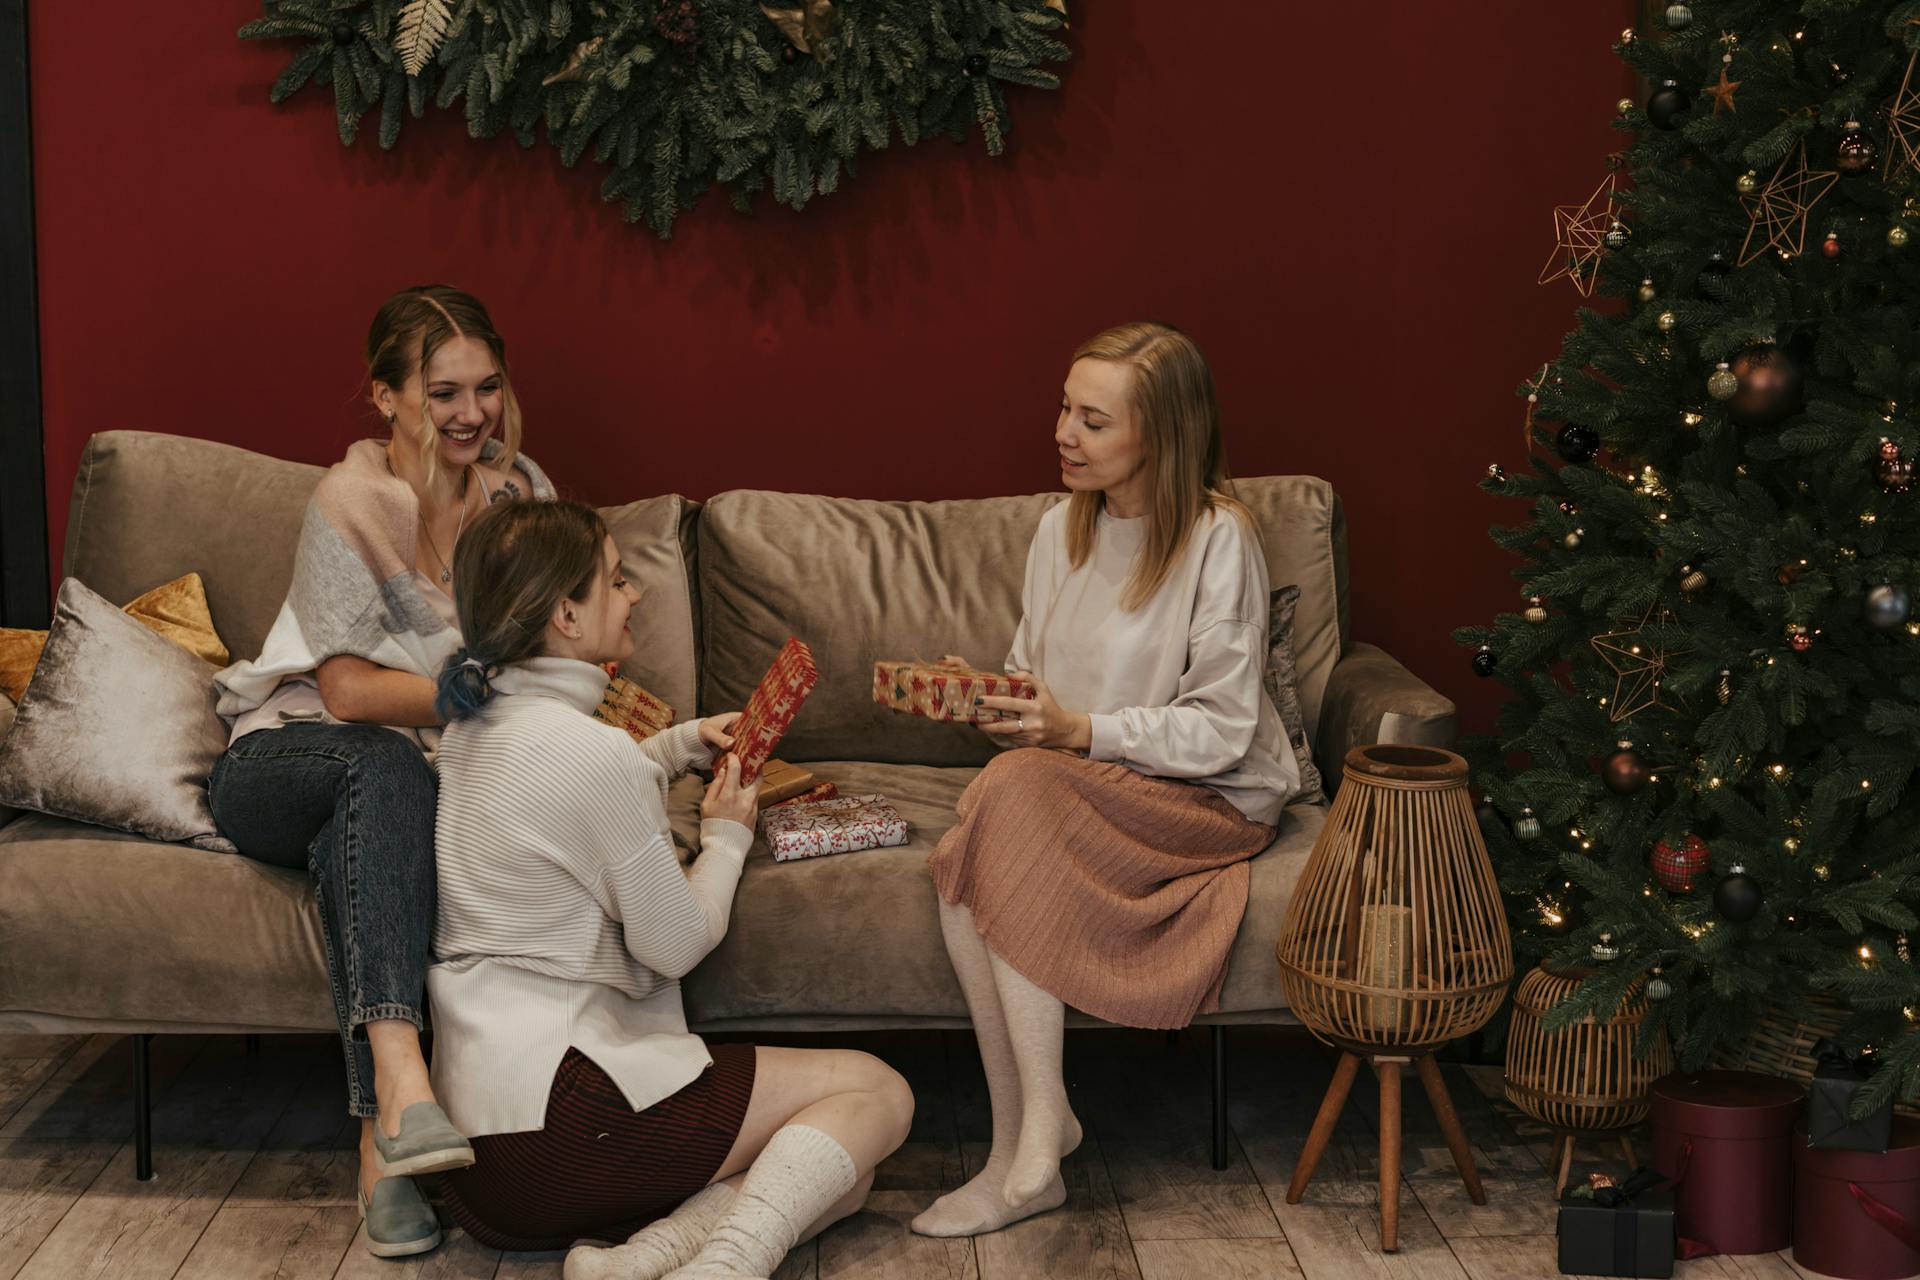 Women in a living room holding Christmas gifts | Source: Pexels